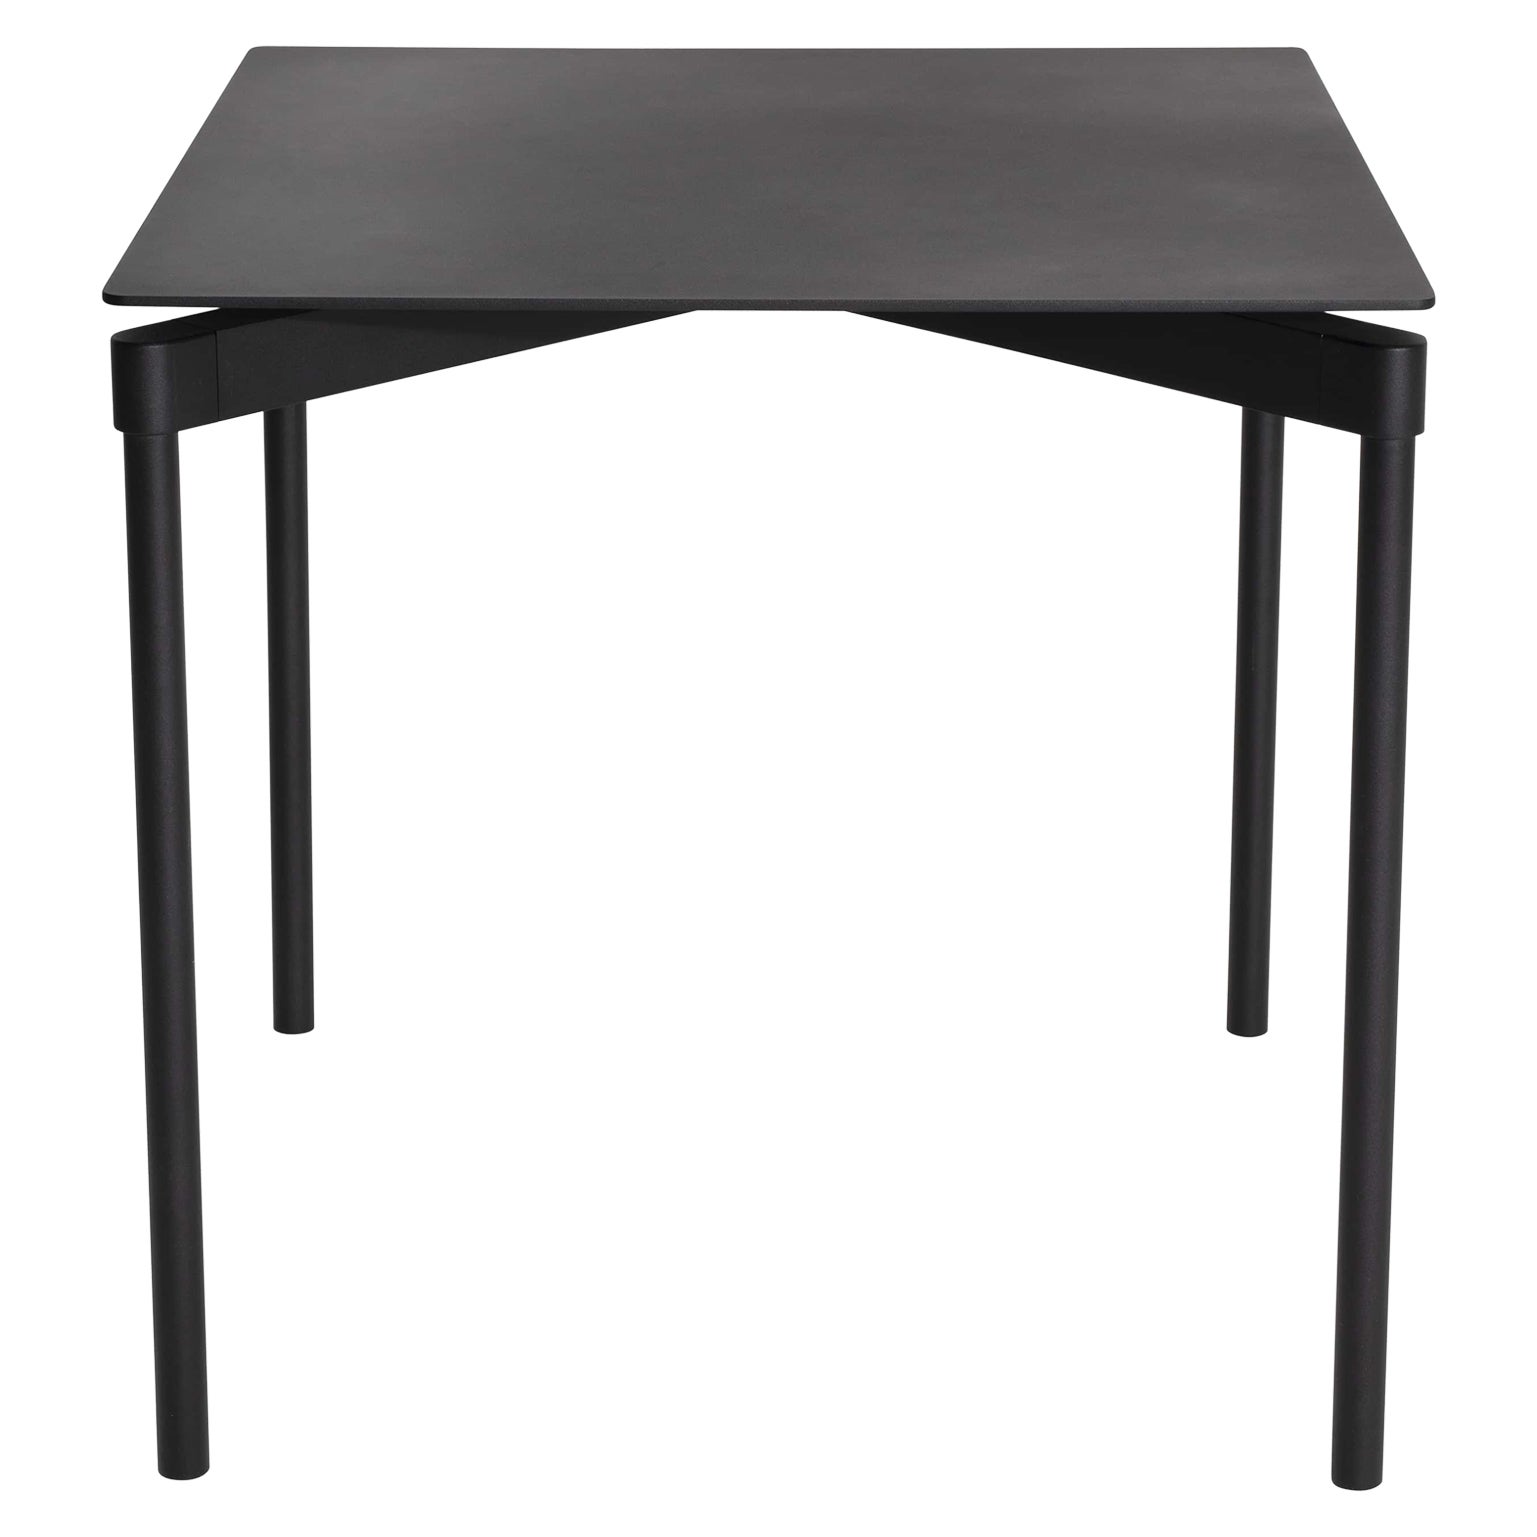 Petite Friture Fromme Square Table in Black Aluminium by Tom Chung